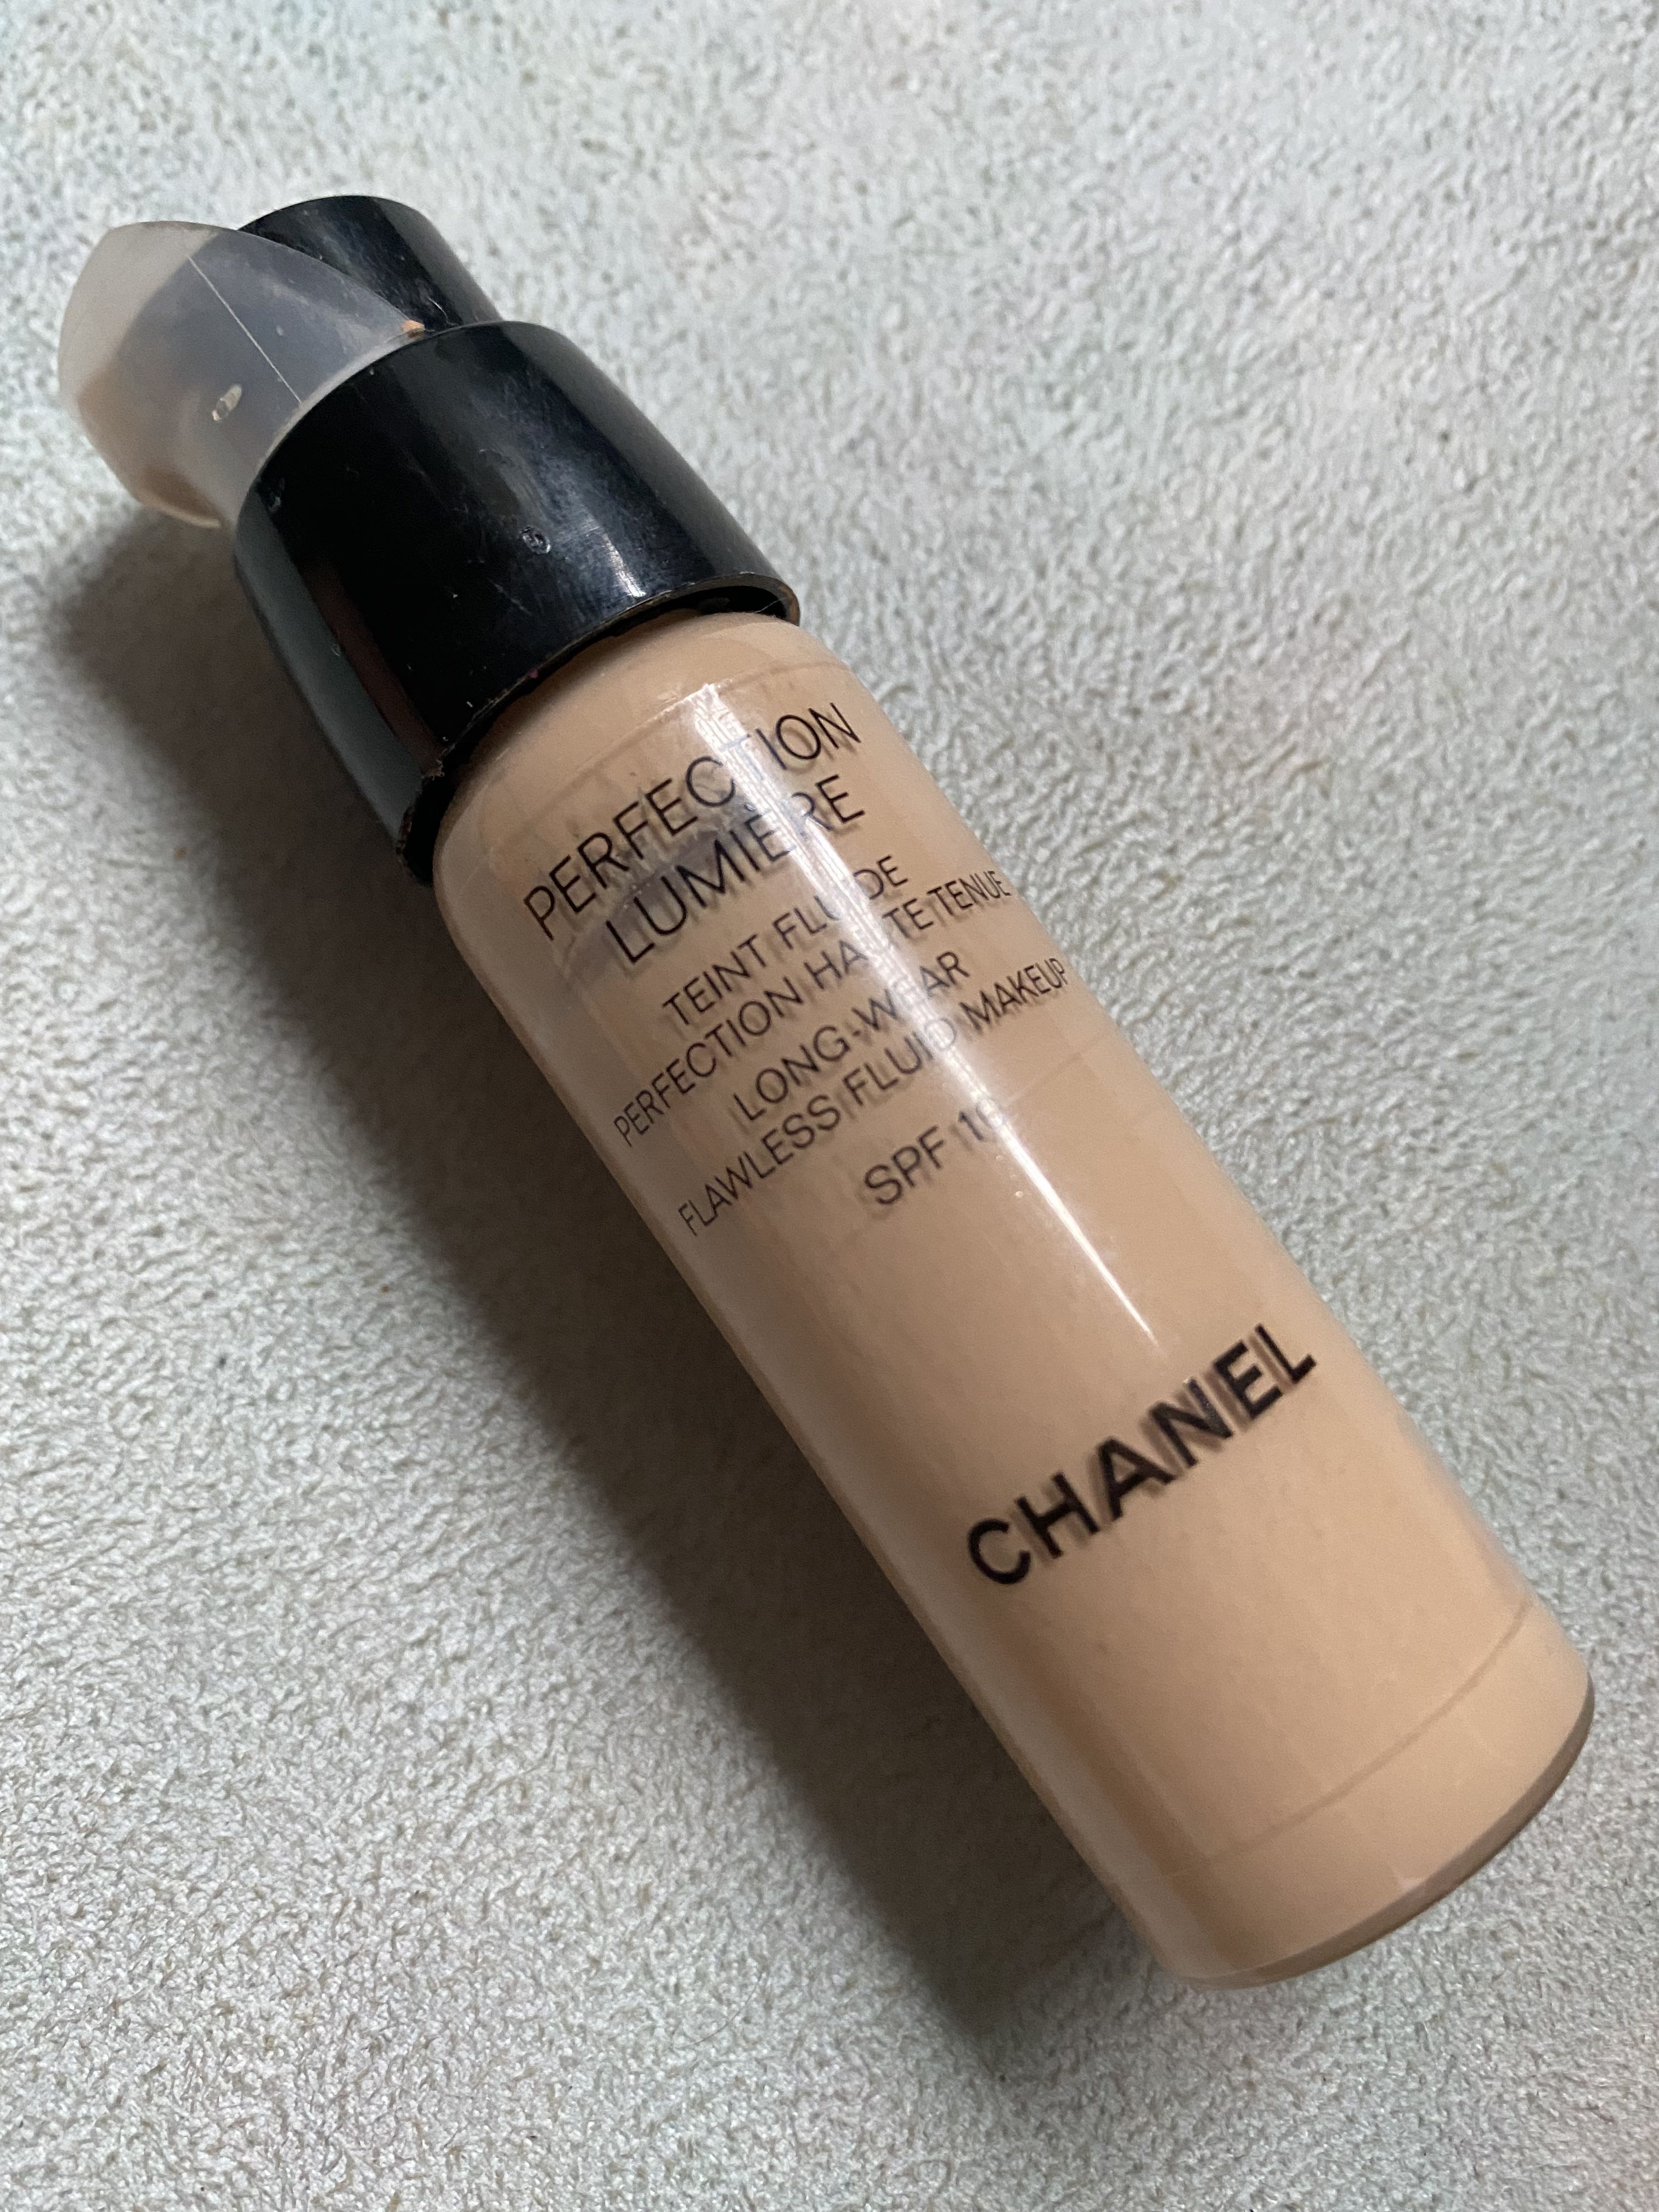 Chanel Perfection Lumiere Liquid Foundation with 10 SPF in 10